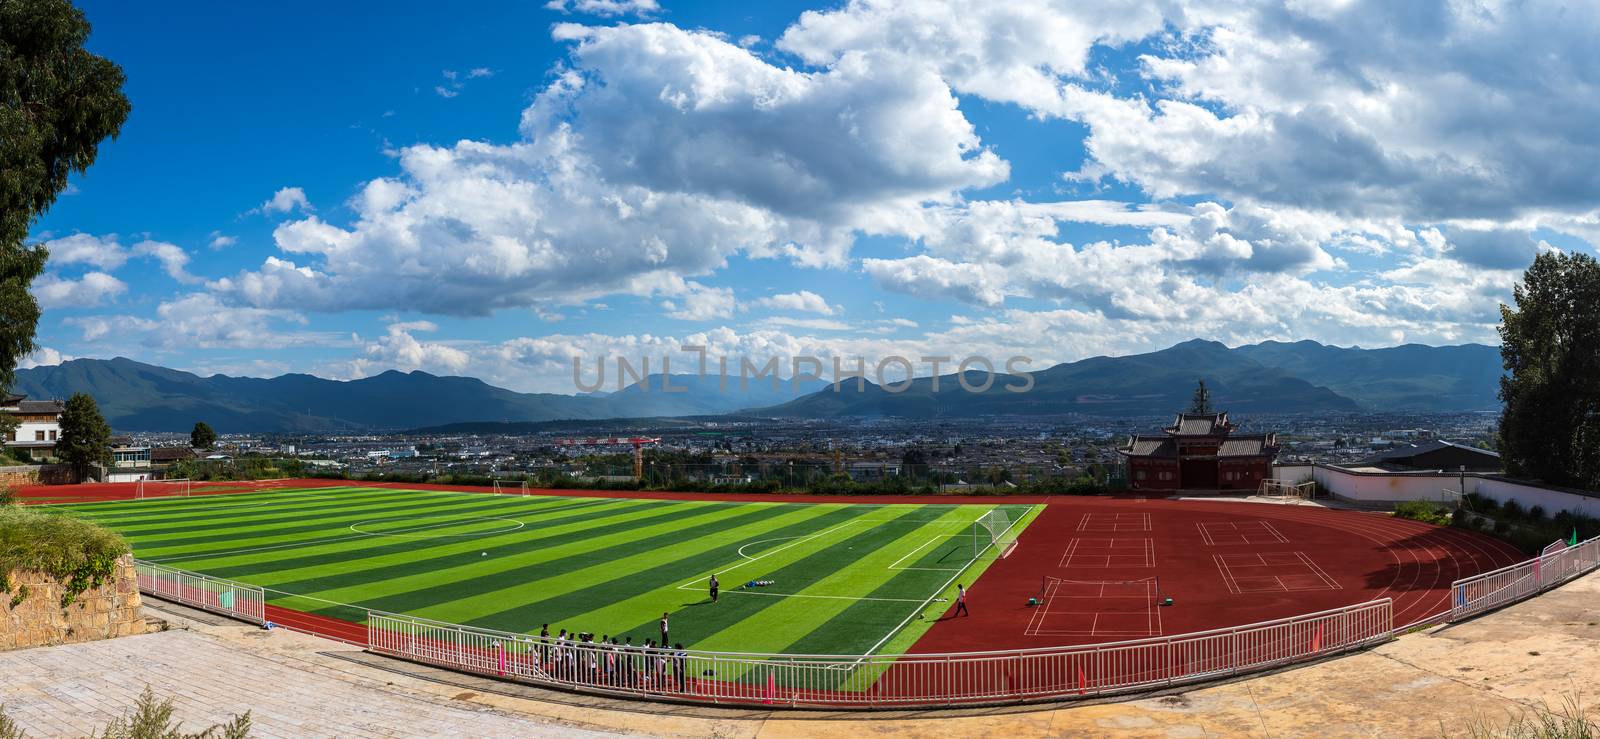 
Football field in Lijiang old town beautiful view from Lijiang by freedomnaruk